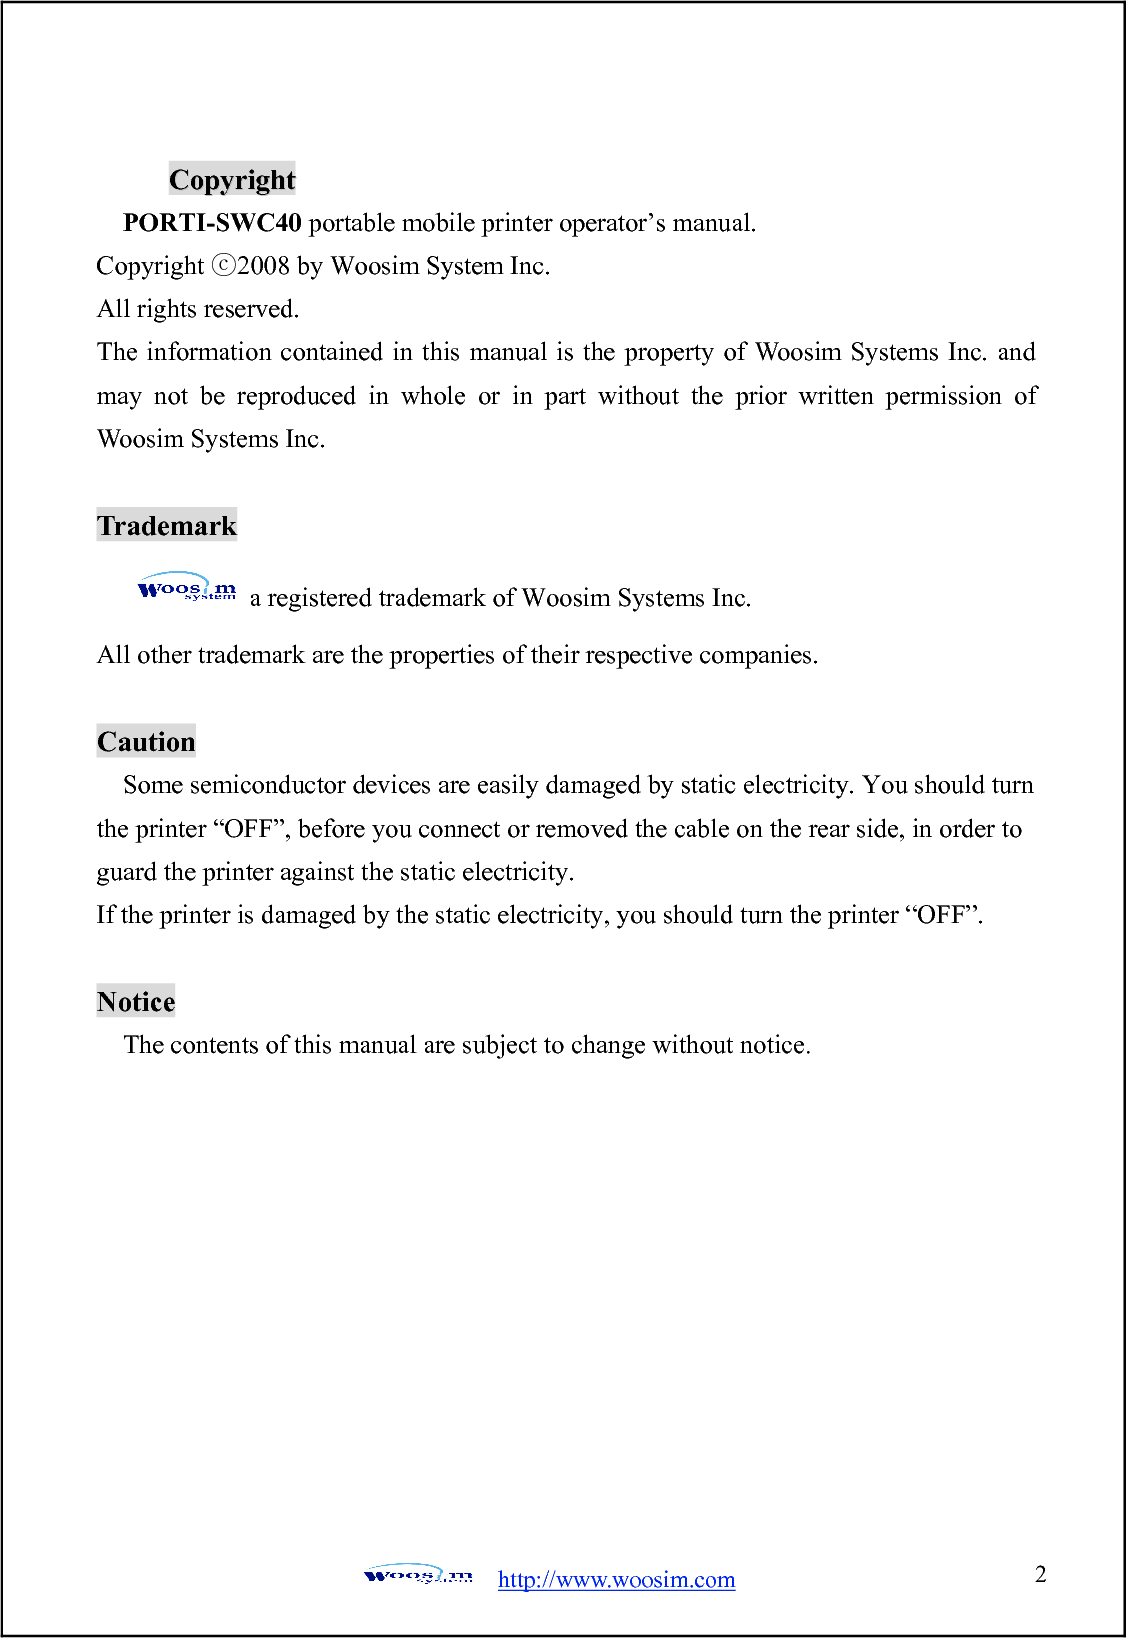  http://www.woosim.com 2                               CCooppyyrriigghhtt  PORTI-SWC40 portable mobile printer operator’s manual. Copyright 200ⓒ8 by Woosim System Inc. All rights reserved. The information contained in this manual is the property of Woosim Systems Inc. and may not be reproduced in whole or in part without the prior written permission of Woosim Systems Inc.  Trademark a registered trademark of Woosim Systems Inc. All other trademark are the properties of their respective companies.  Caution Some semiconductor devices are easily damaged by static electricity. You should turn the printer “OFF”, before you connect or removed the cable on the rear side, in order to guard the printer against the static electricity.   If the printer is damaged by the static electricity, you should turn the printer “OFF”.  Notice The contents of this manual are subject to change without notice.  